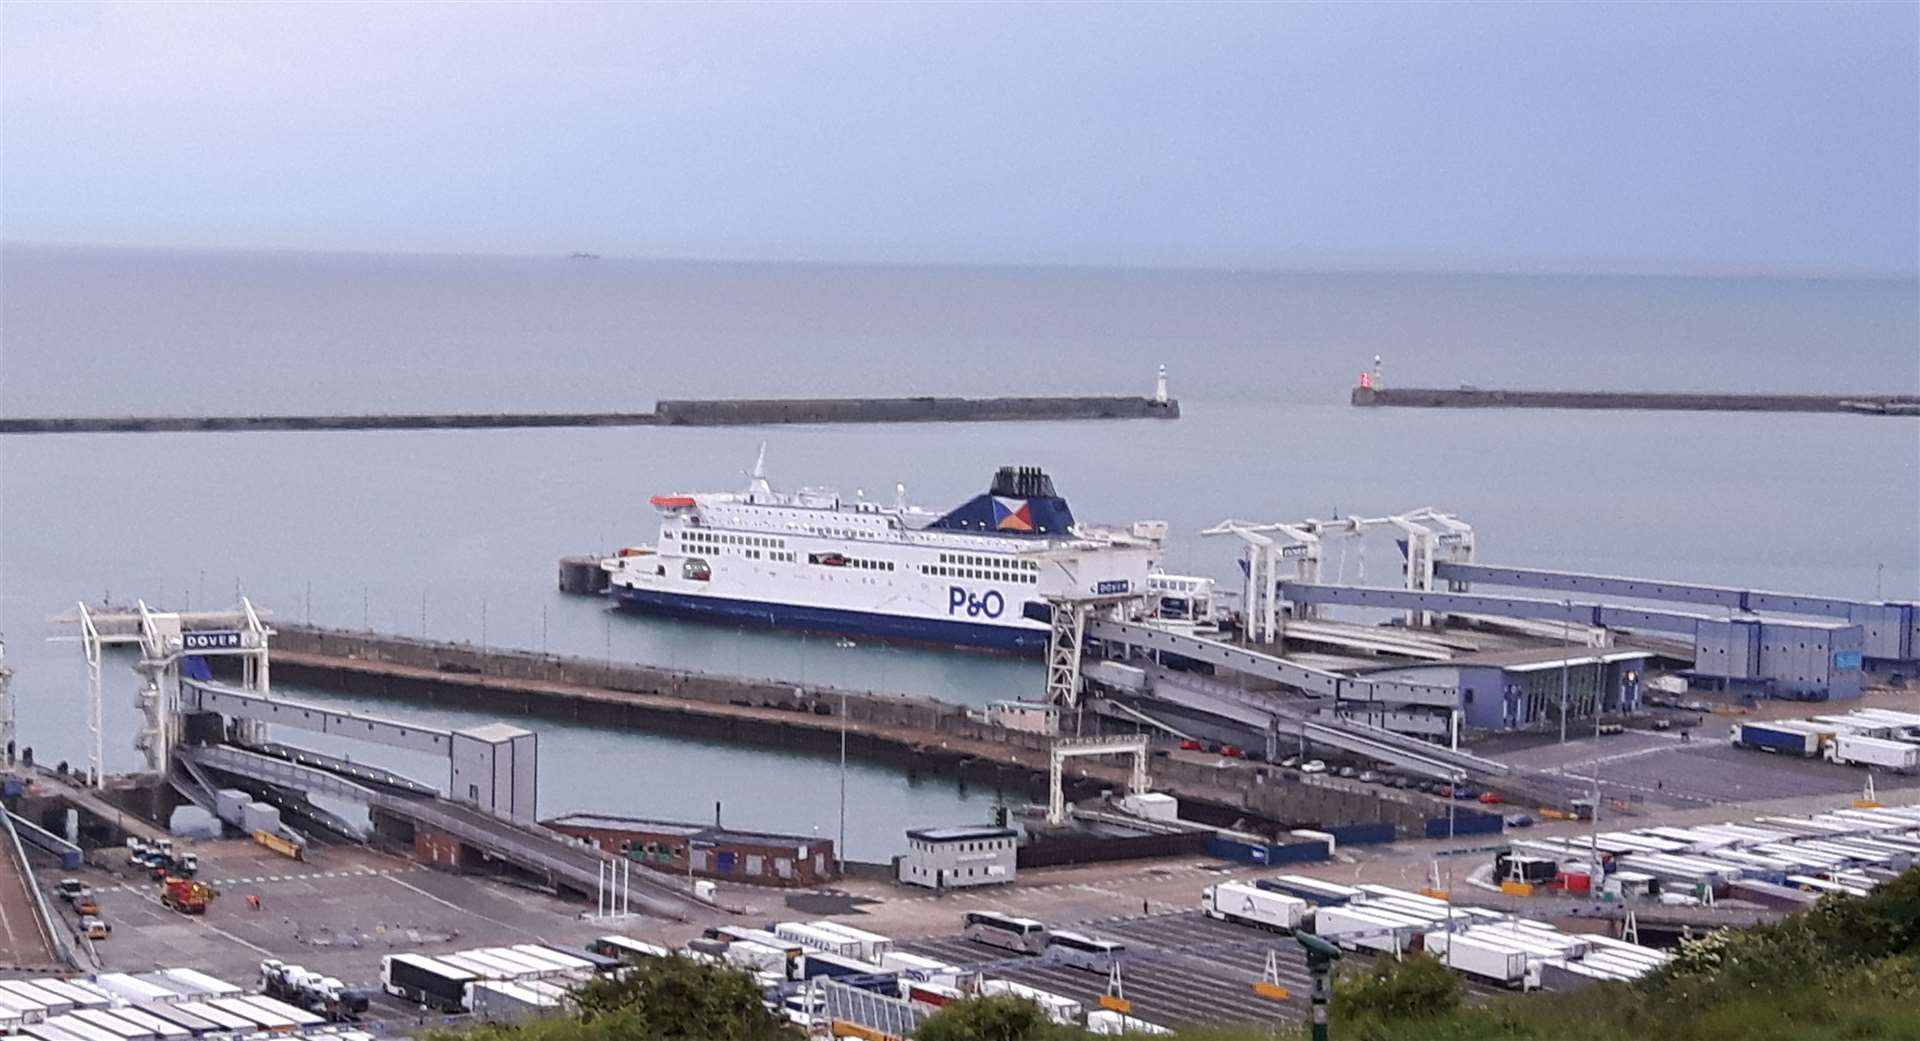 The strike action is affecting Dover sailings